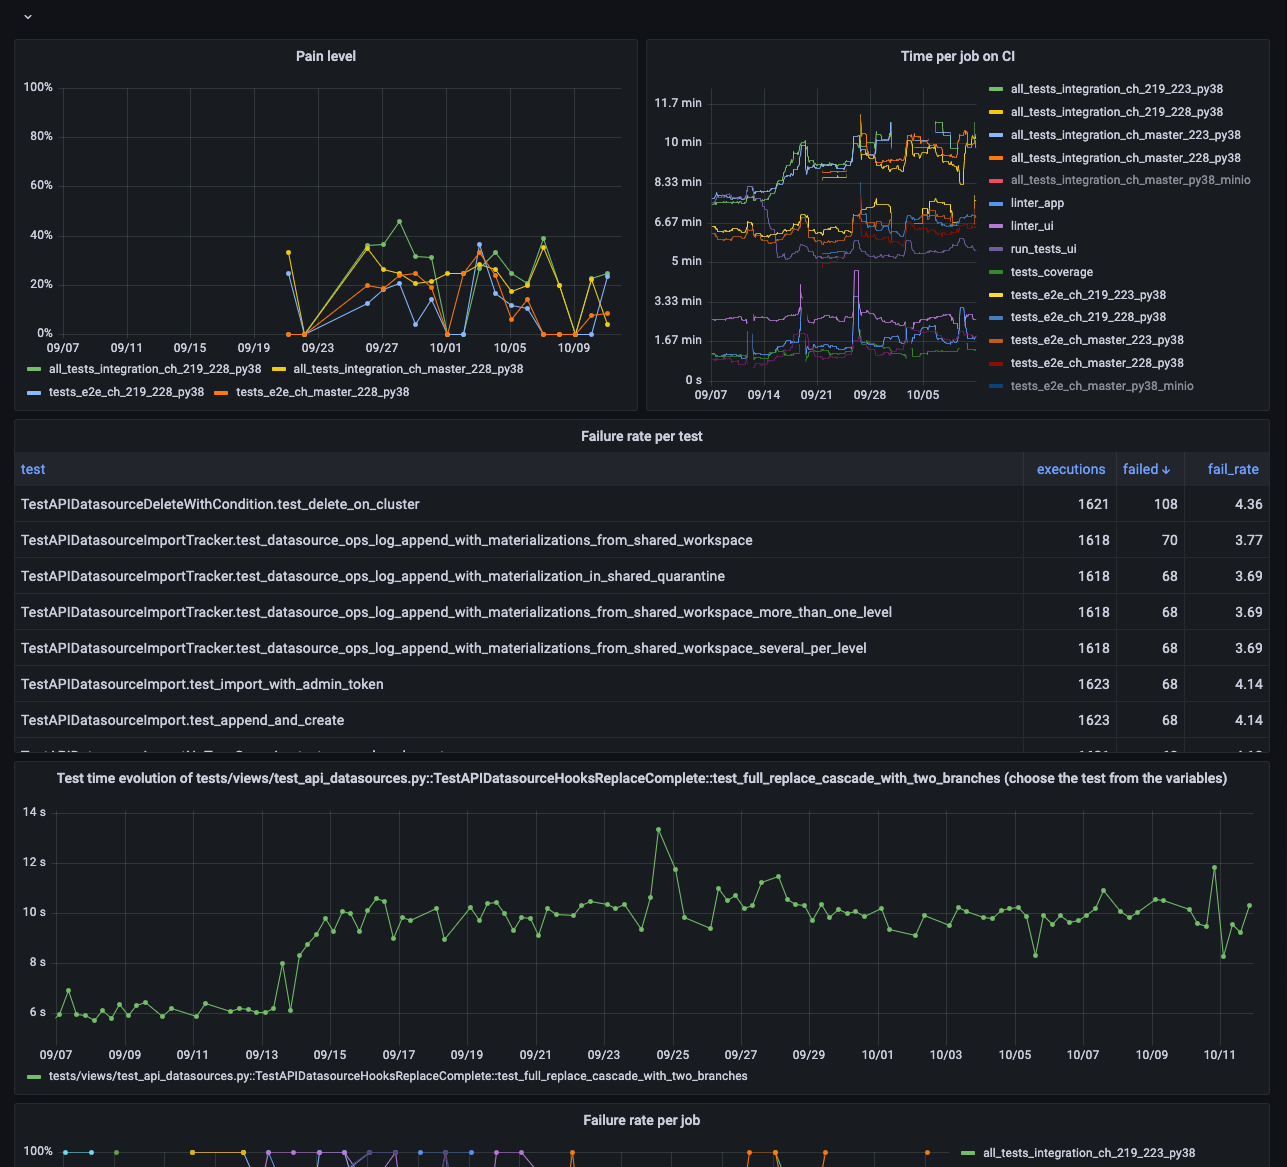 A Grafana dashboard showing CI pipeline metrics including pain level, time per job, failure rate per test, and test time evolution